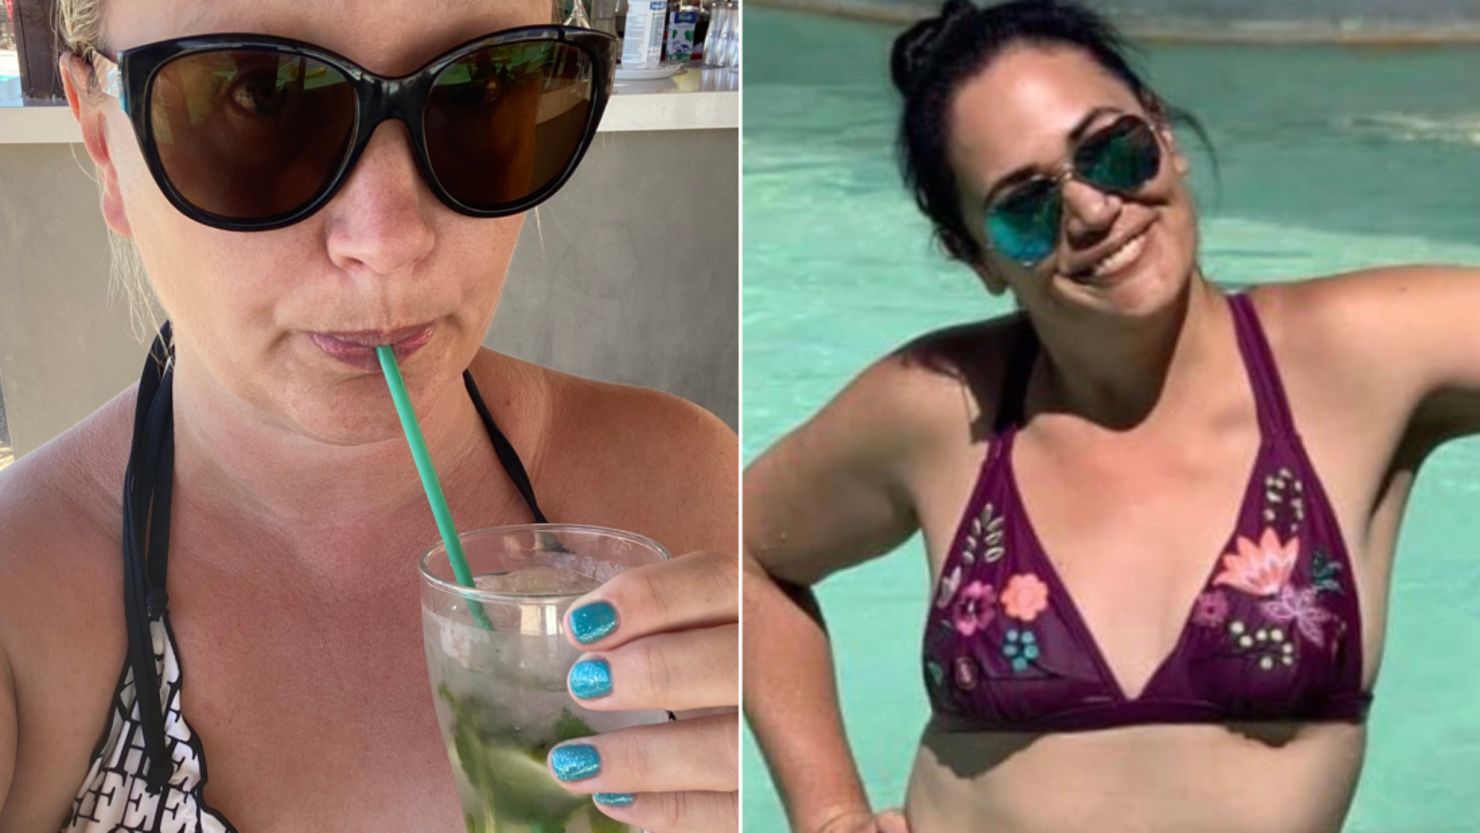 Medical professionals Stephanie deGiorgio, left, and Liz Massey posted photos of themselves in bikinis in response to the article. "We all know medicine and bikinis don't mix," Massey said on Twitter. "Bikinis are not recommended for use in the workplace. Please bikini responsibly."  